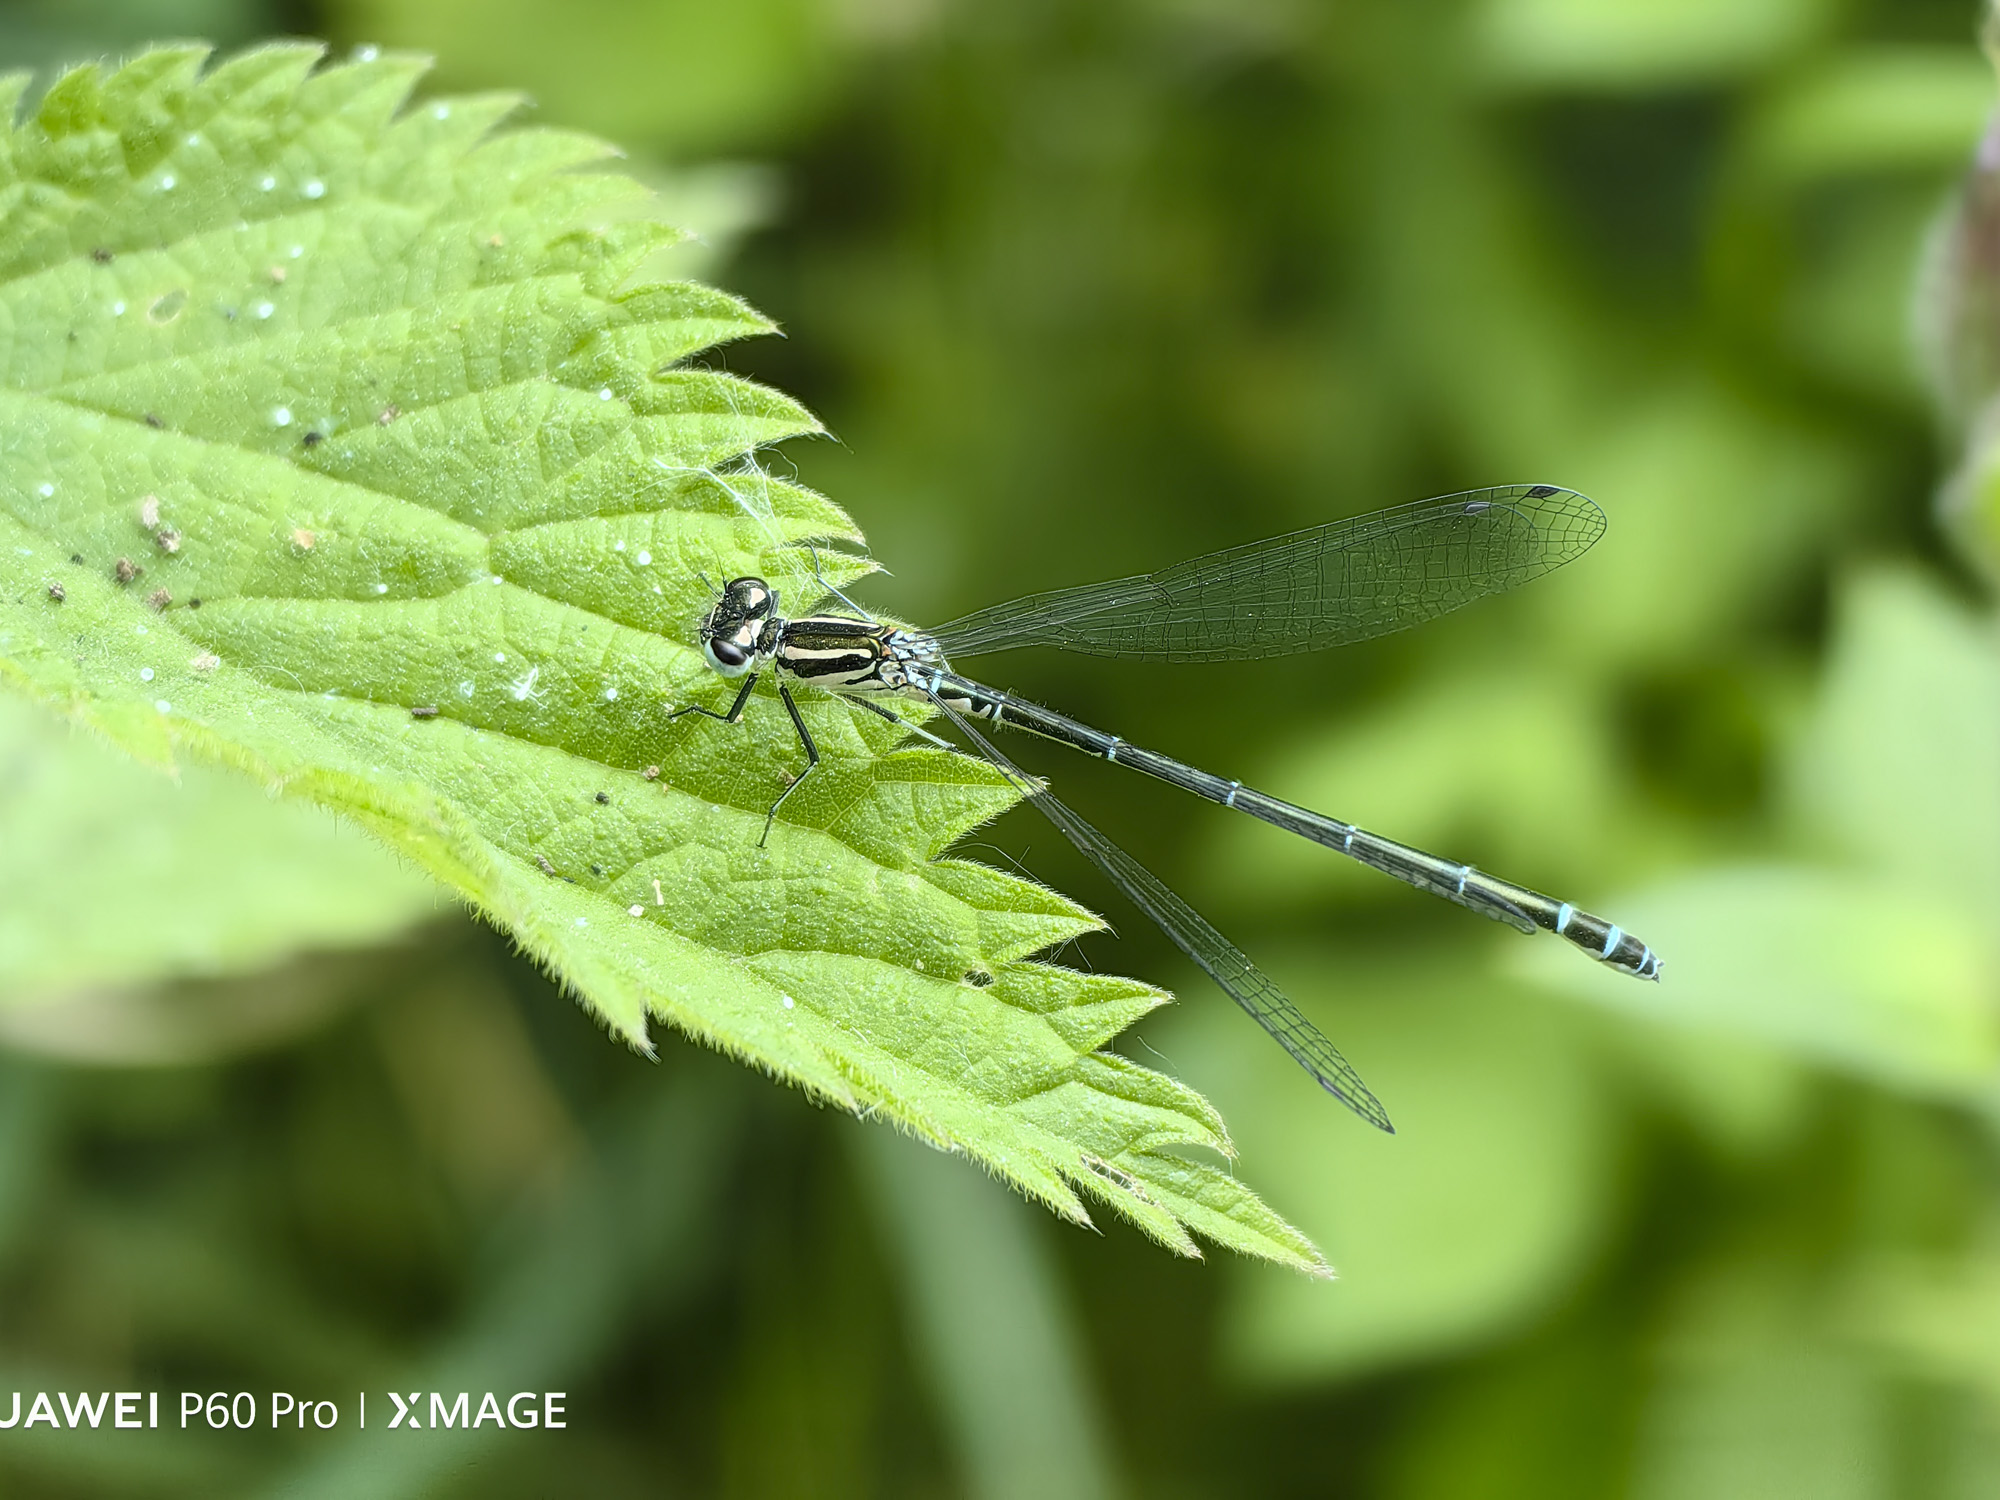 Huawei P60 Pro Closeup of a dragonfly on a leaf